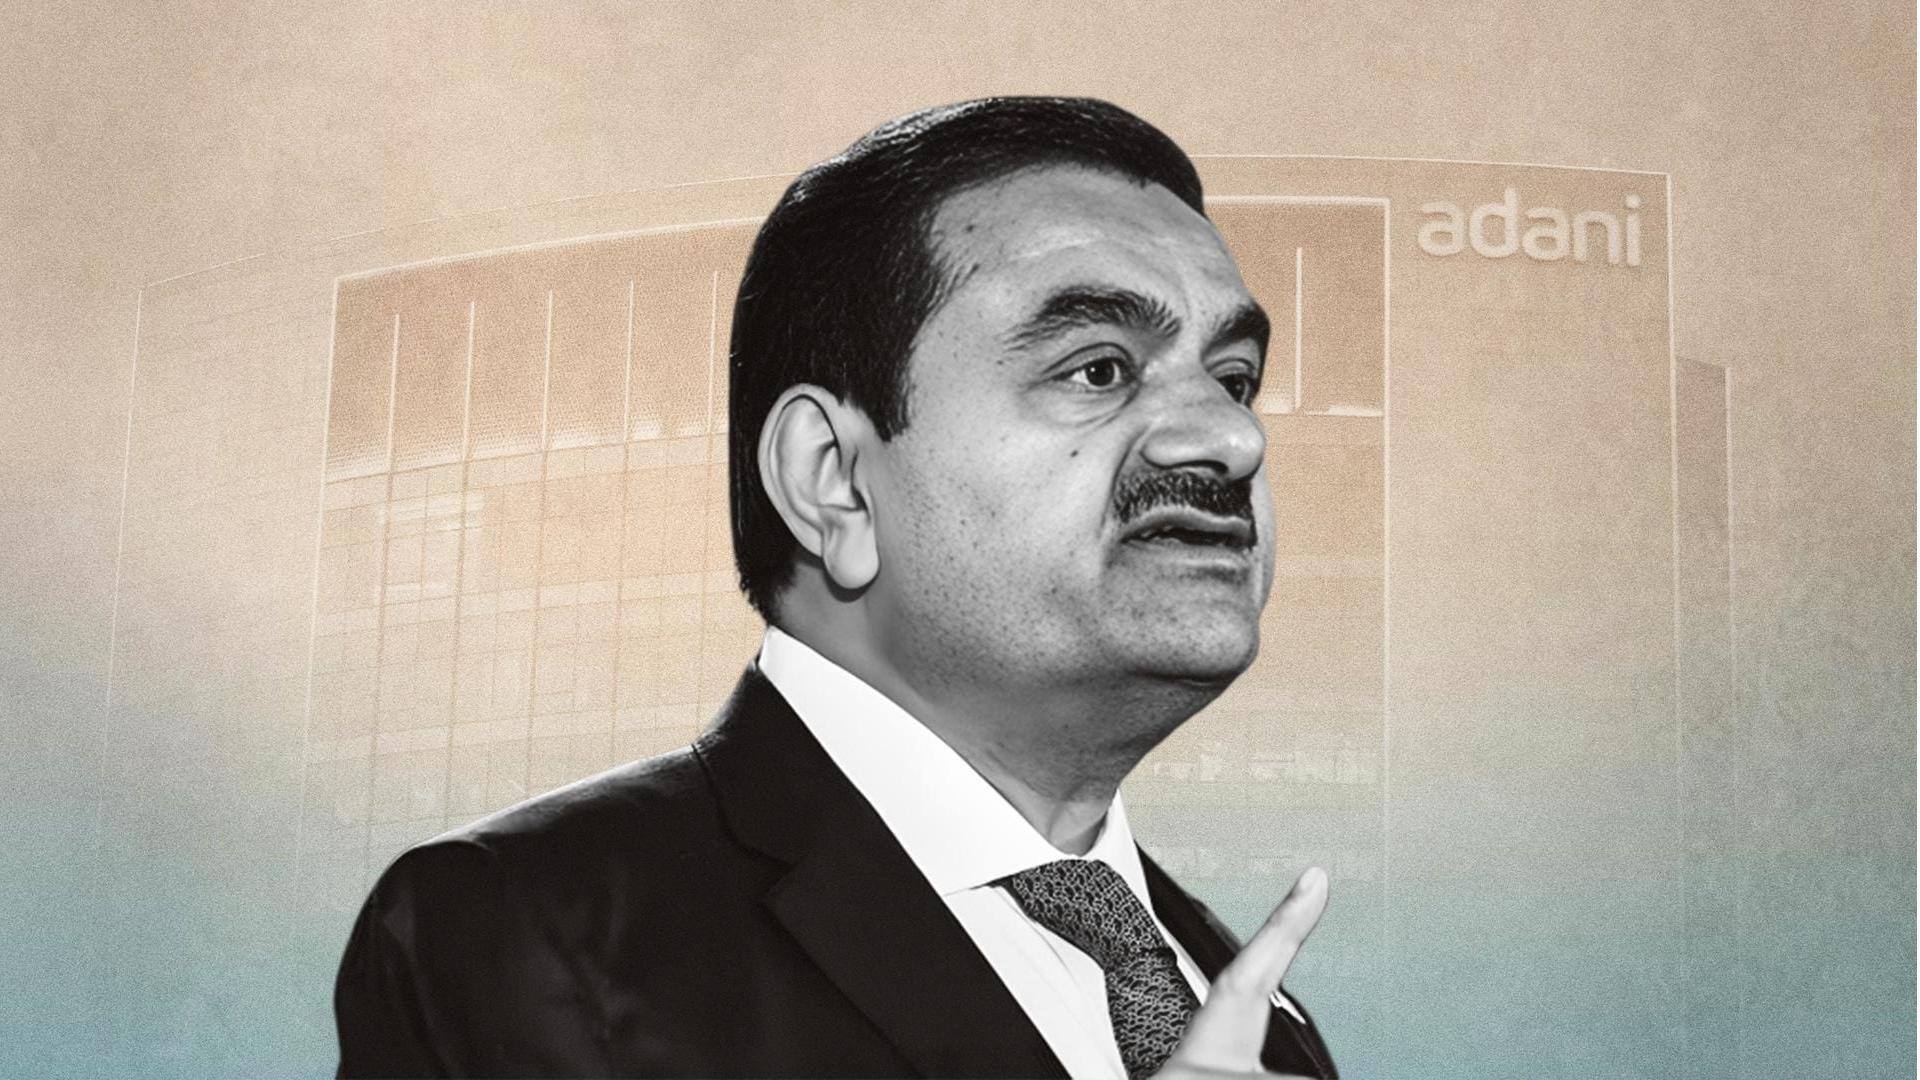 Adani Group increases stake in two of its listed companies